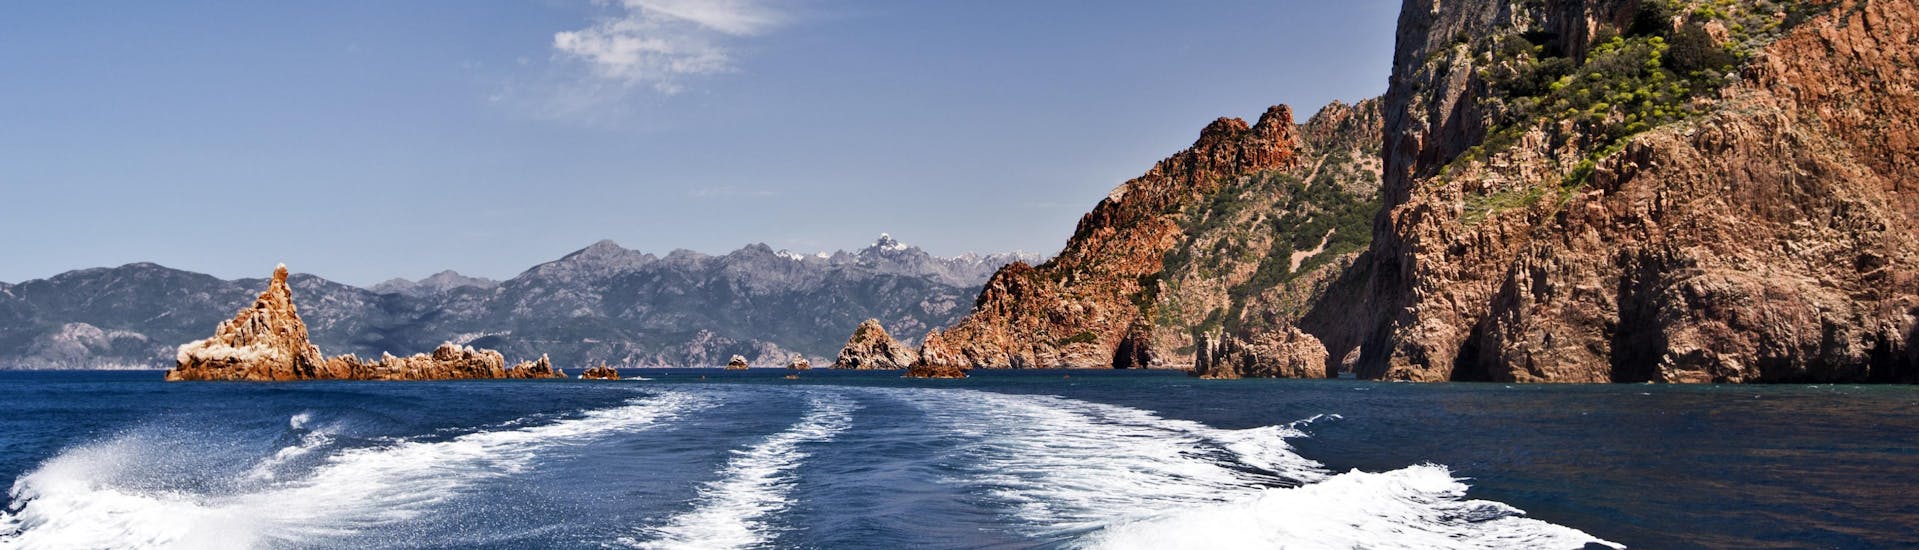 View from the back of a boat during a boat trip to the impressive Capo Rosso on the west coast of Corsica.